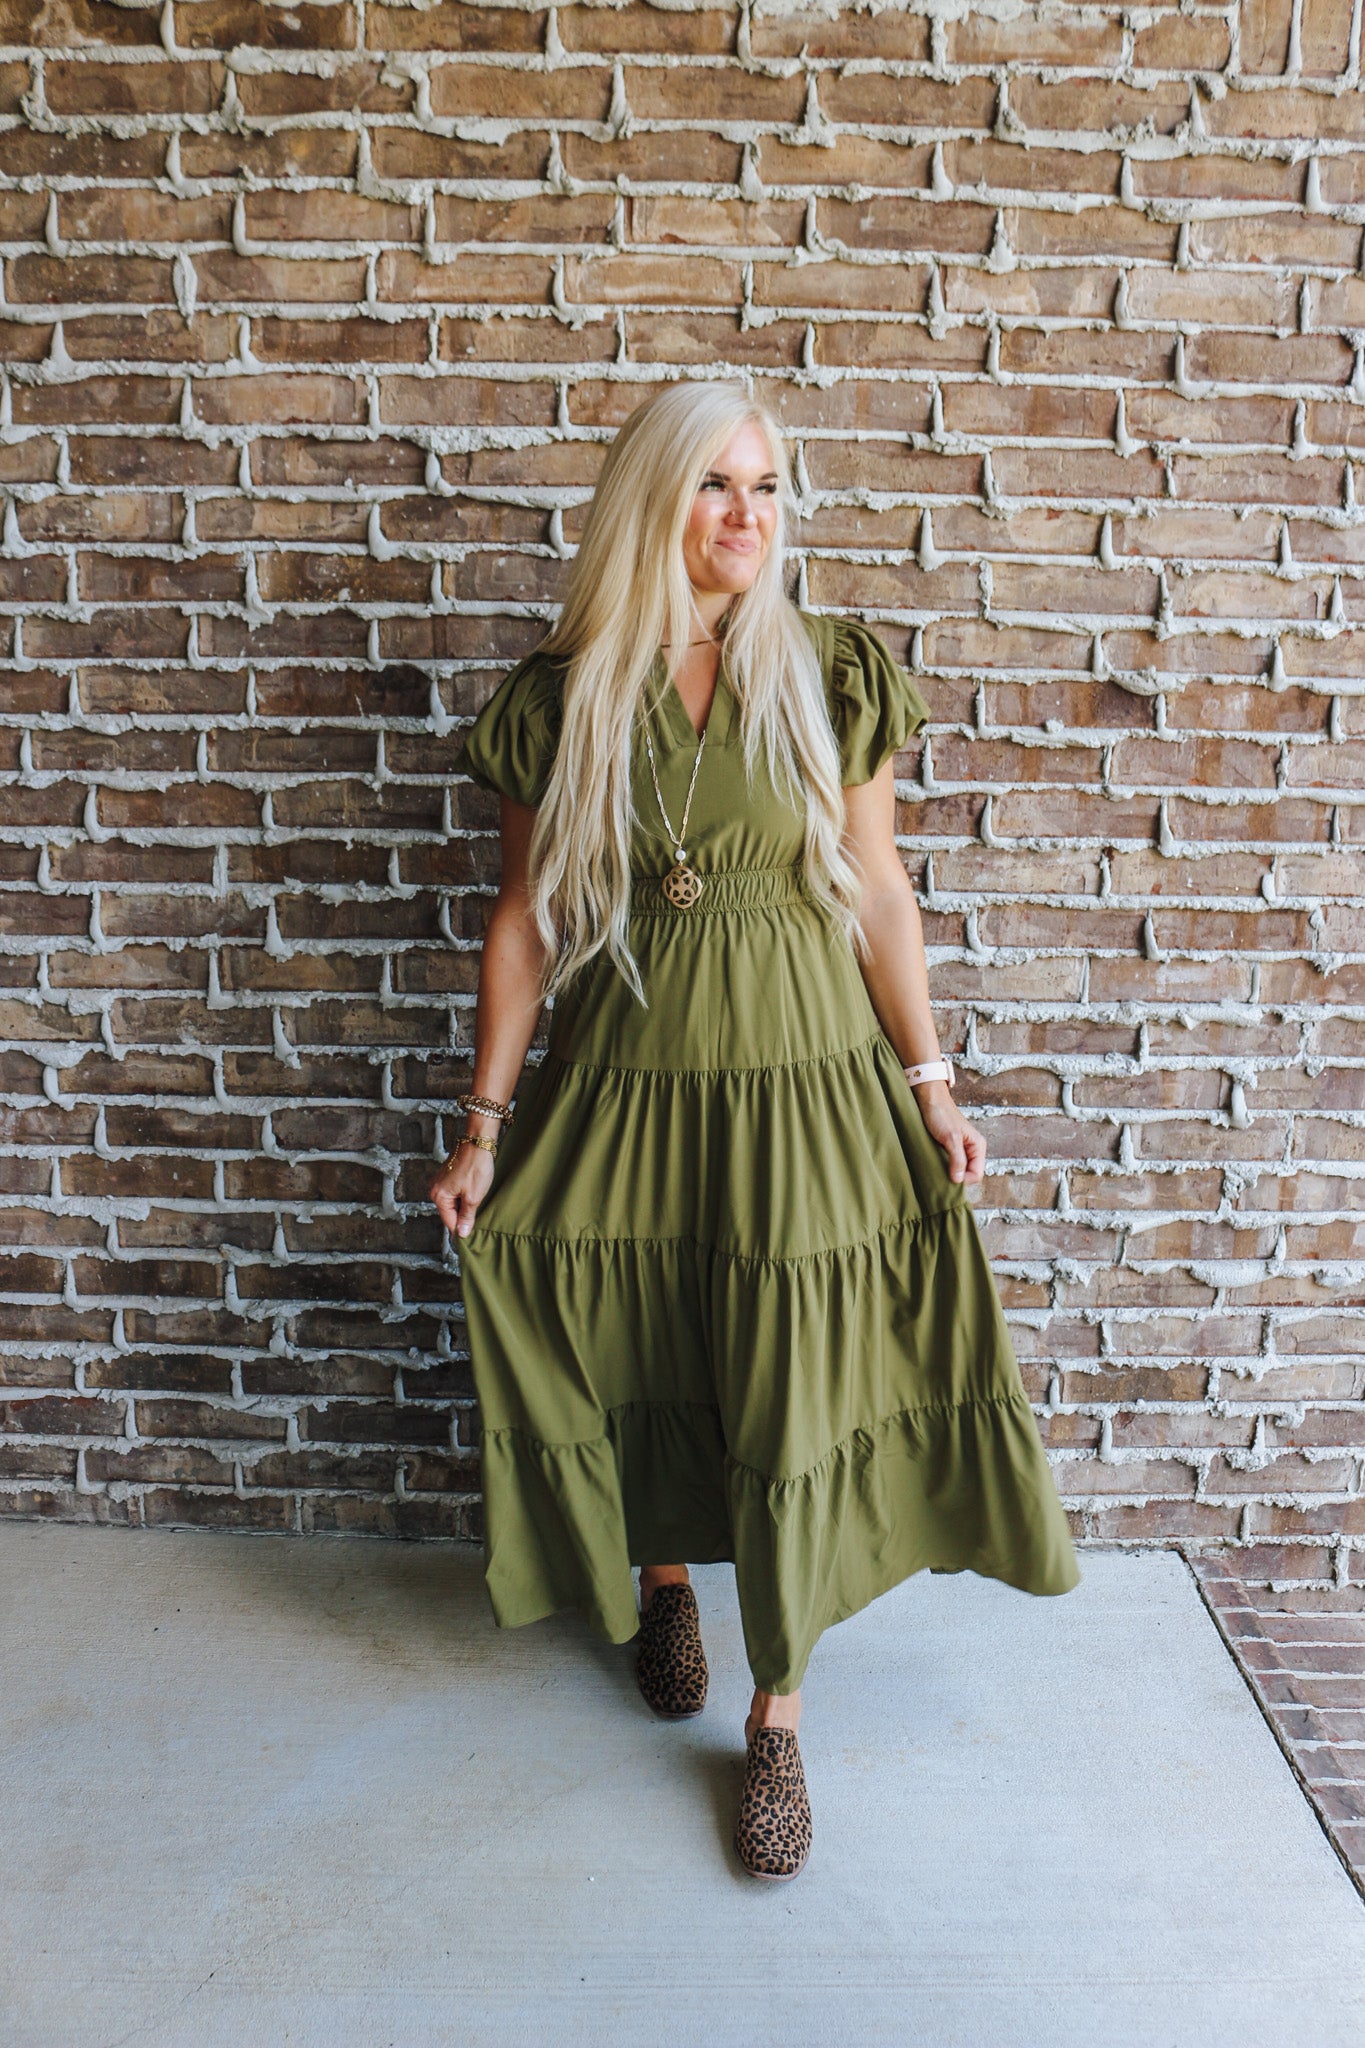 Can You Blame Me Martini Olive Dress